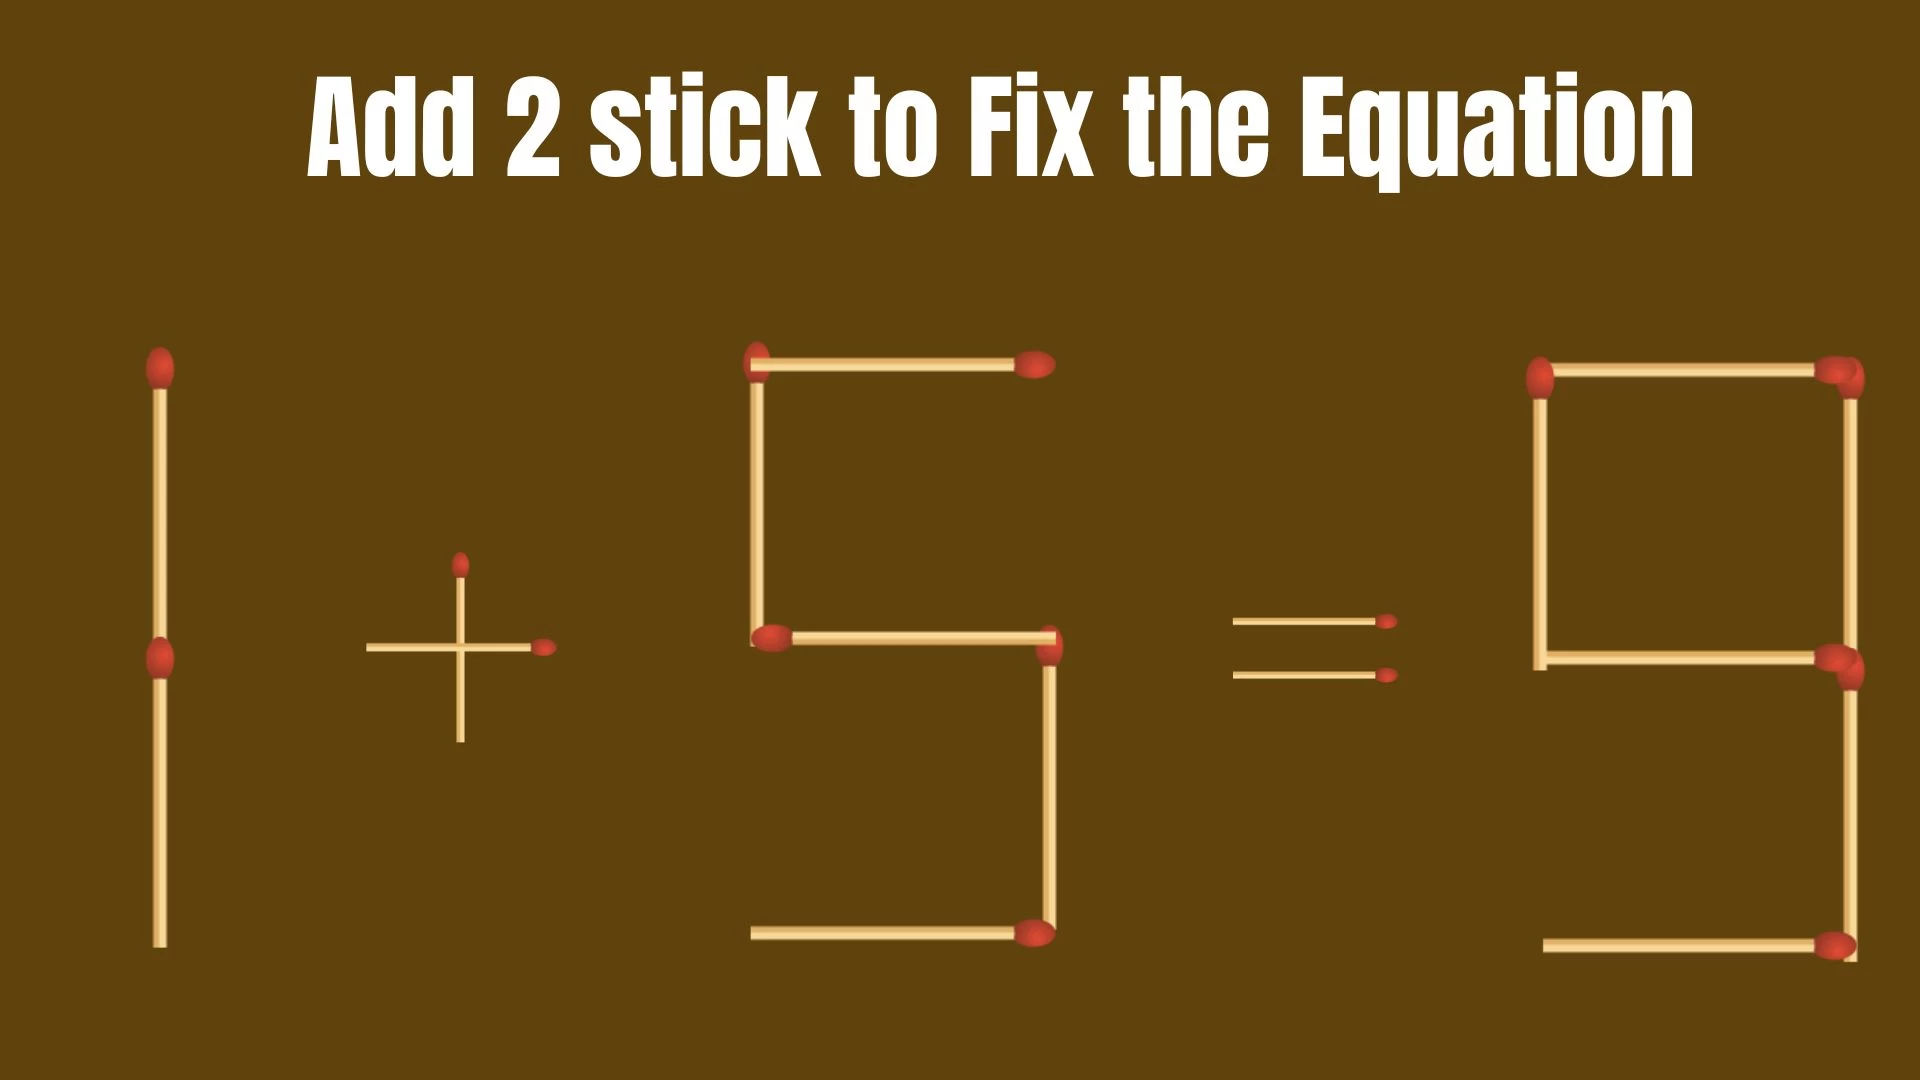 Solve the Puzzle to Transform 1+5=9 by Adding 2 Matchsticks to Correct the Equation